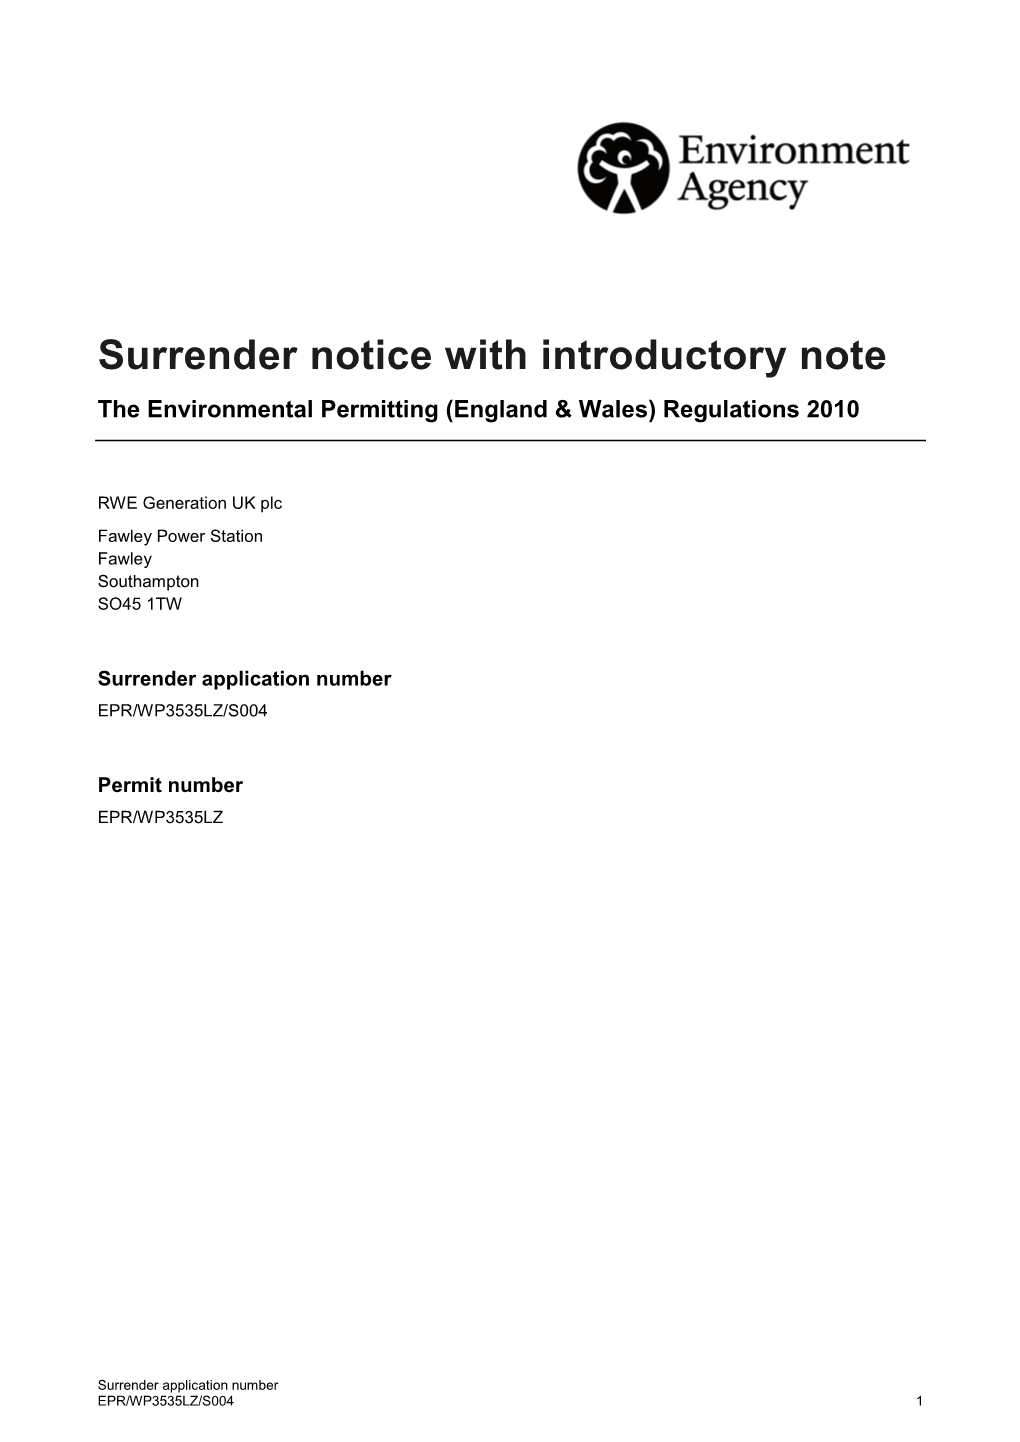 Surrender Notice with Introductory Note the Environmental Permitting (England & Wales) Regulations 2010